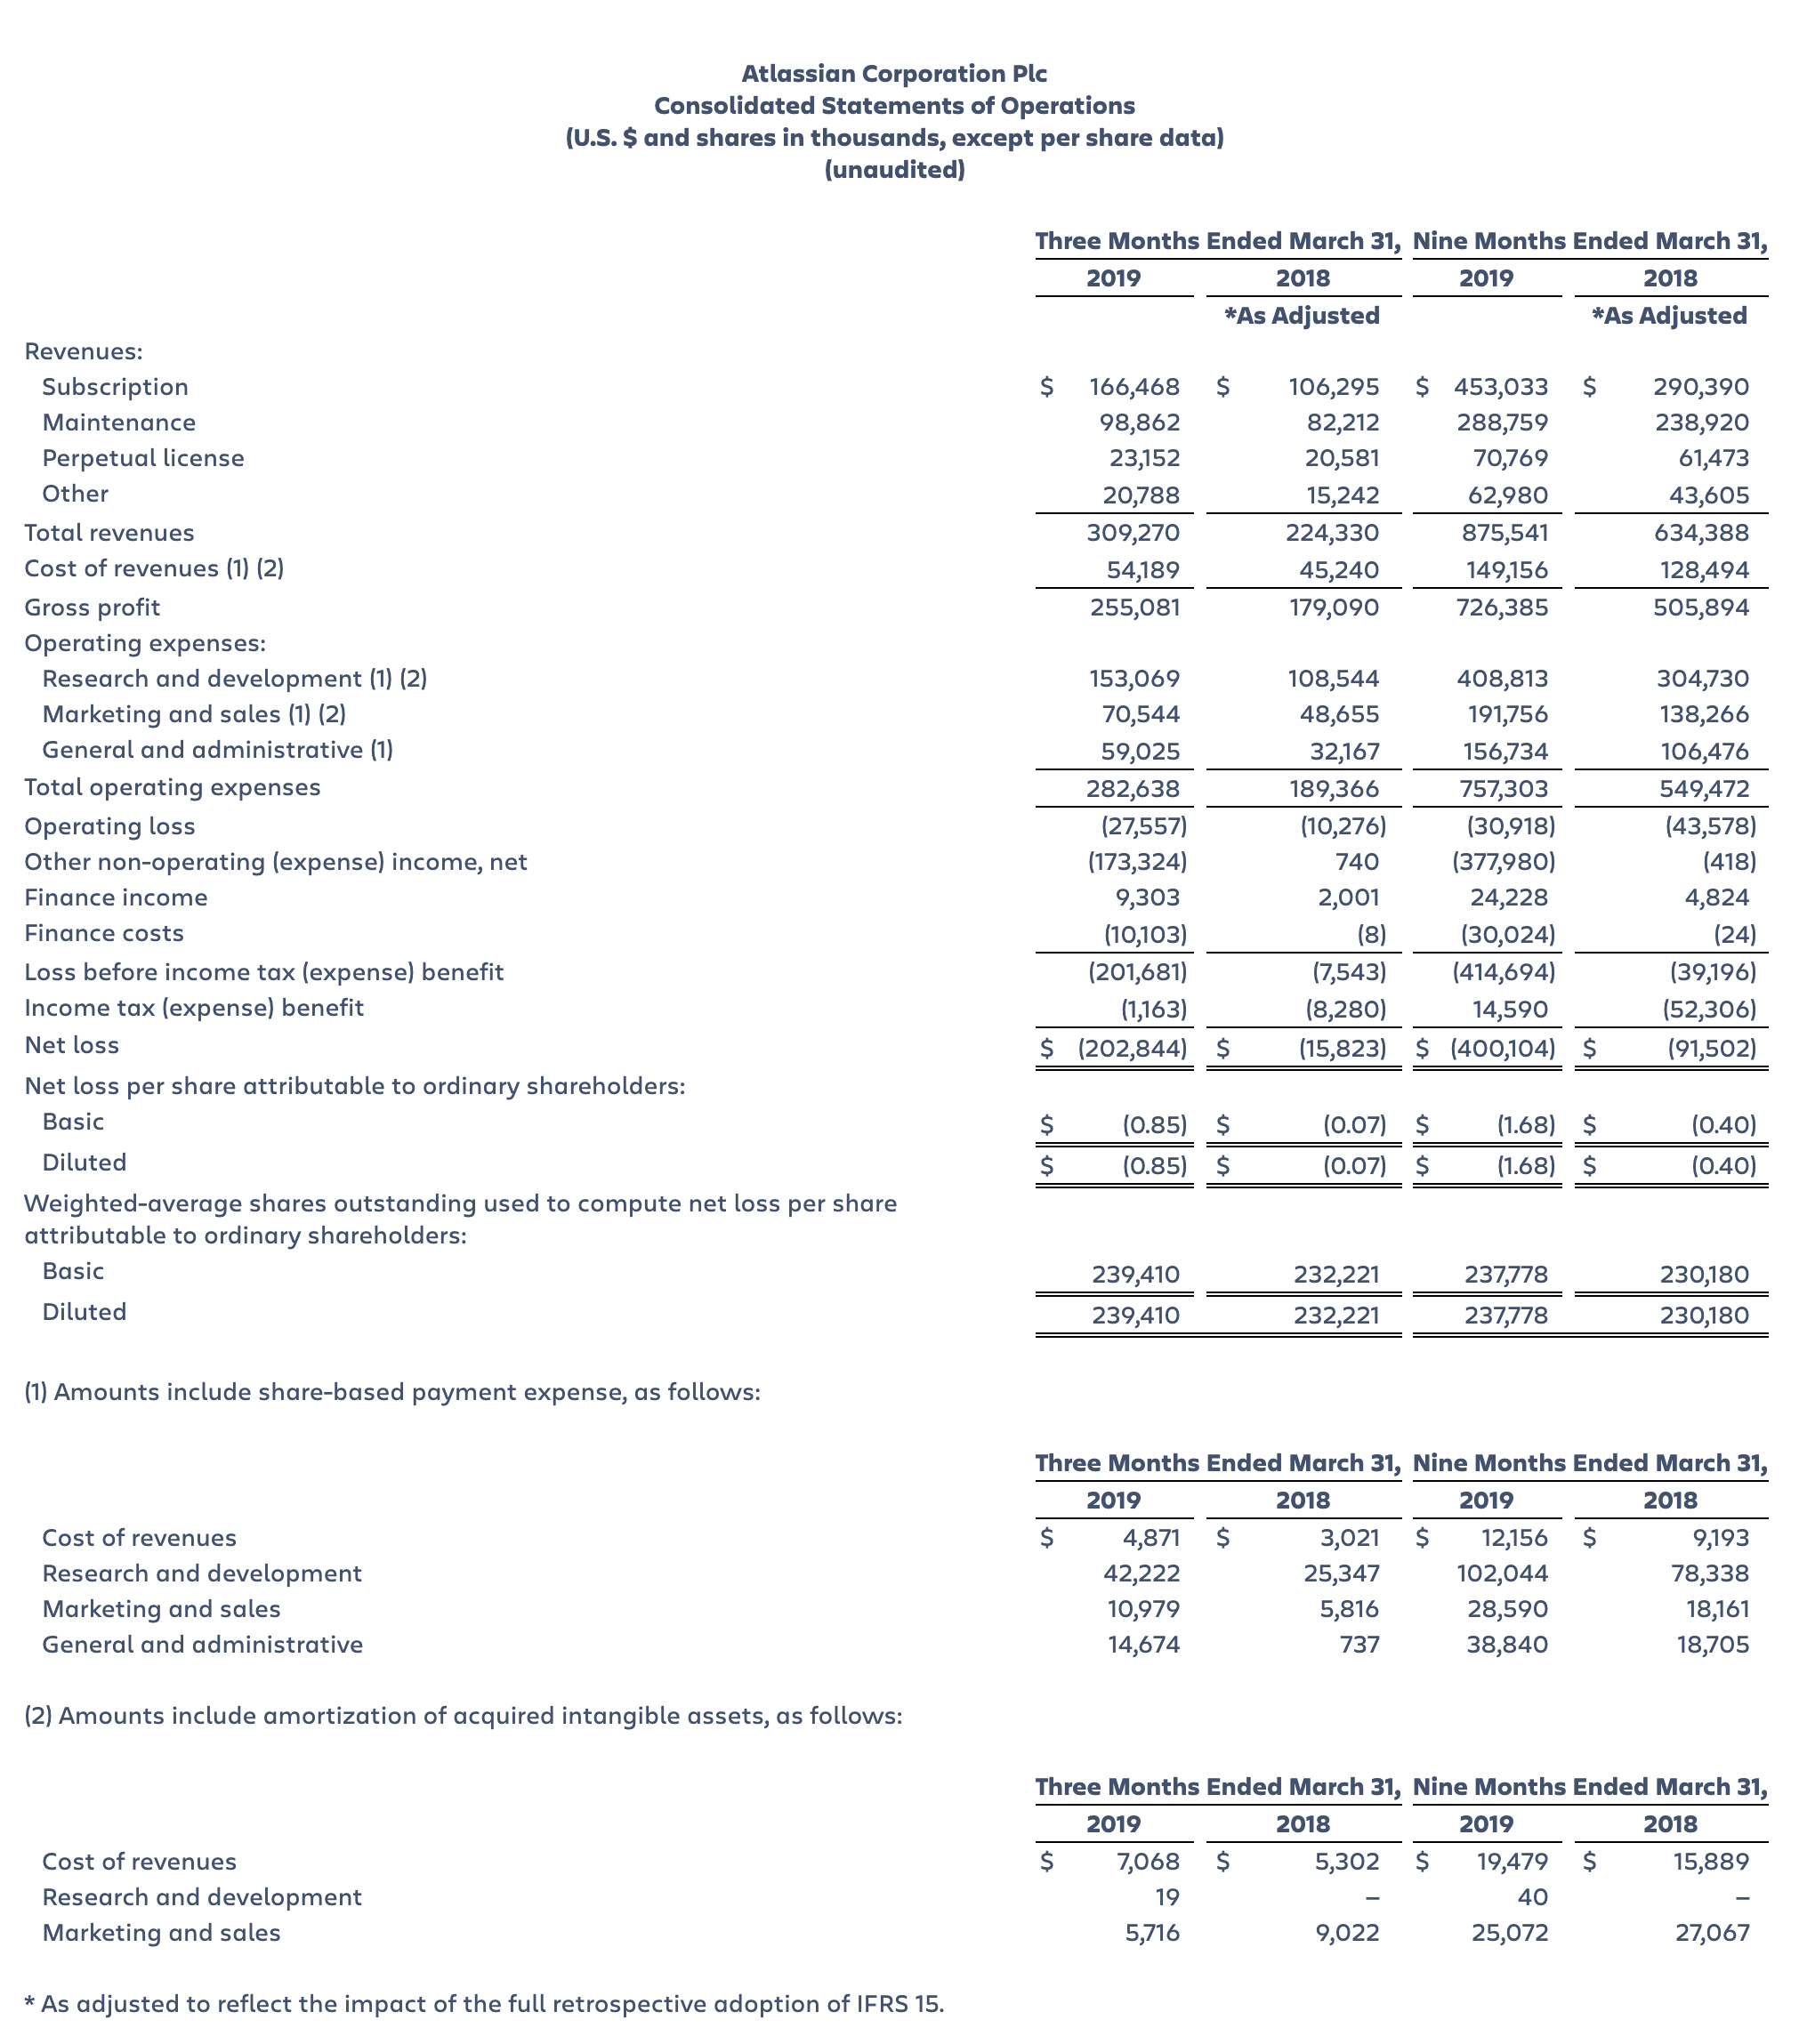 Atlassian Corporation Plc Consolidated Statements of Operations